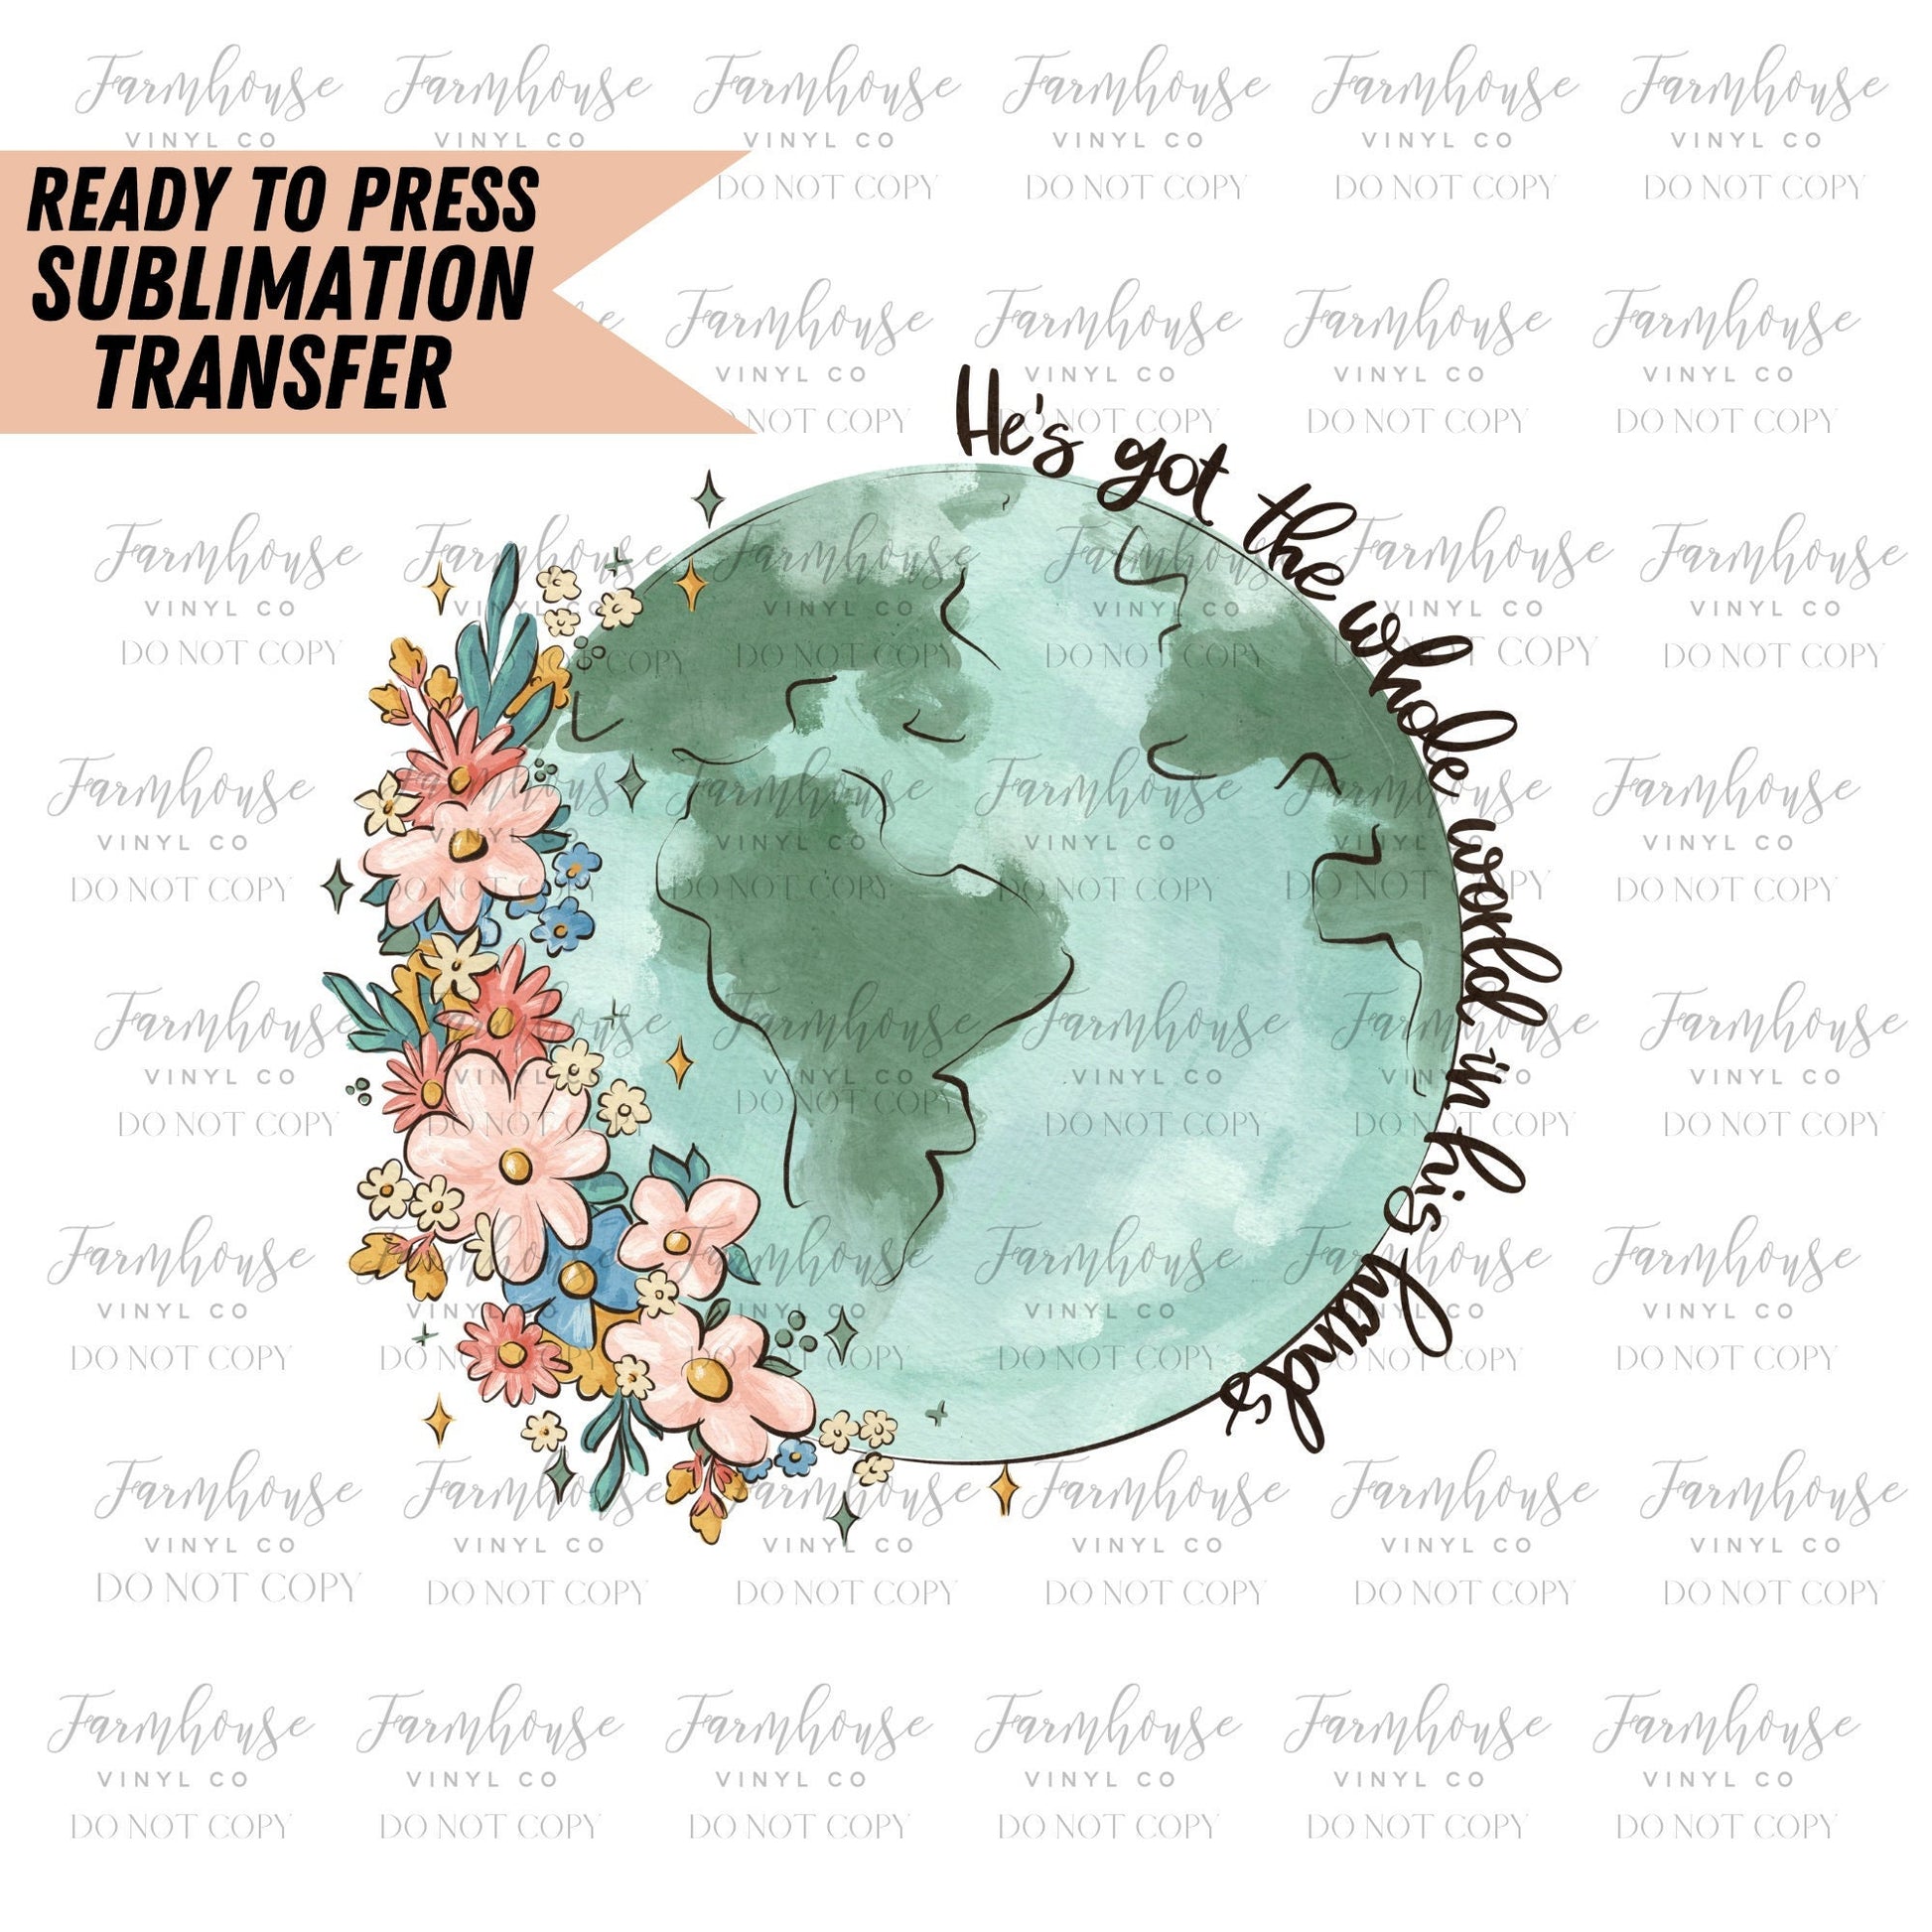 He's Got the Whole World in His Hands, Ready to Press Sublimation Transfer, Sublimation Prints, Heat Transfer, Faith, Floral Watercolor - Farmhouse Vinyl Co